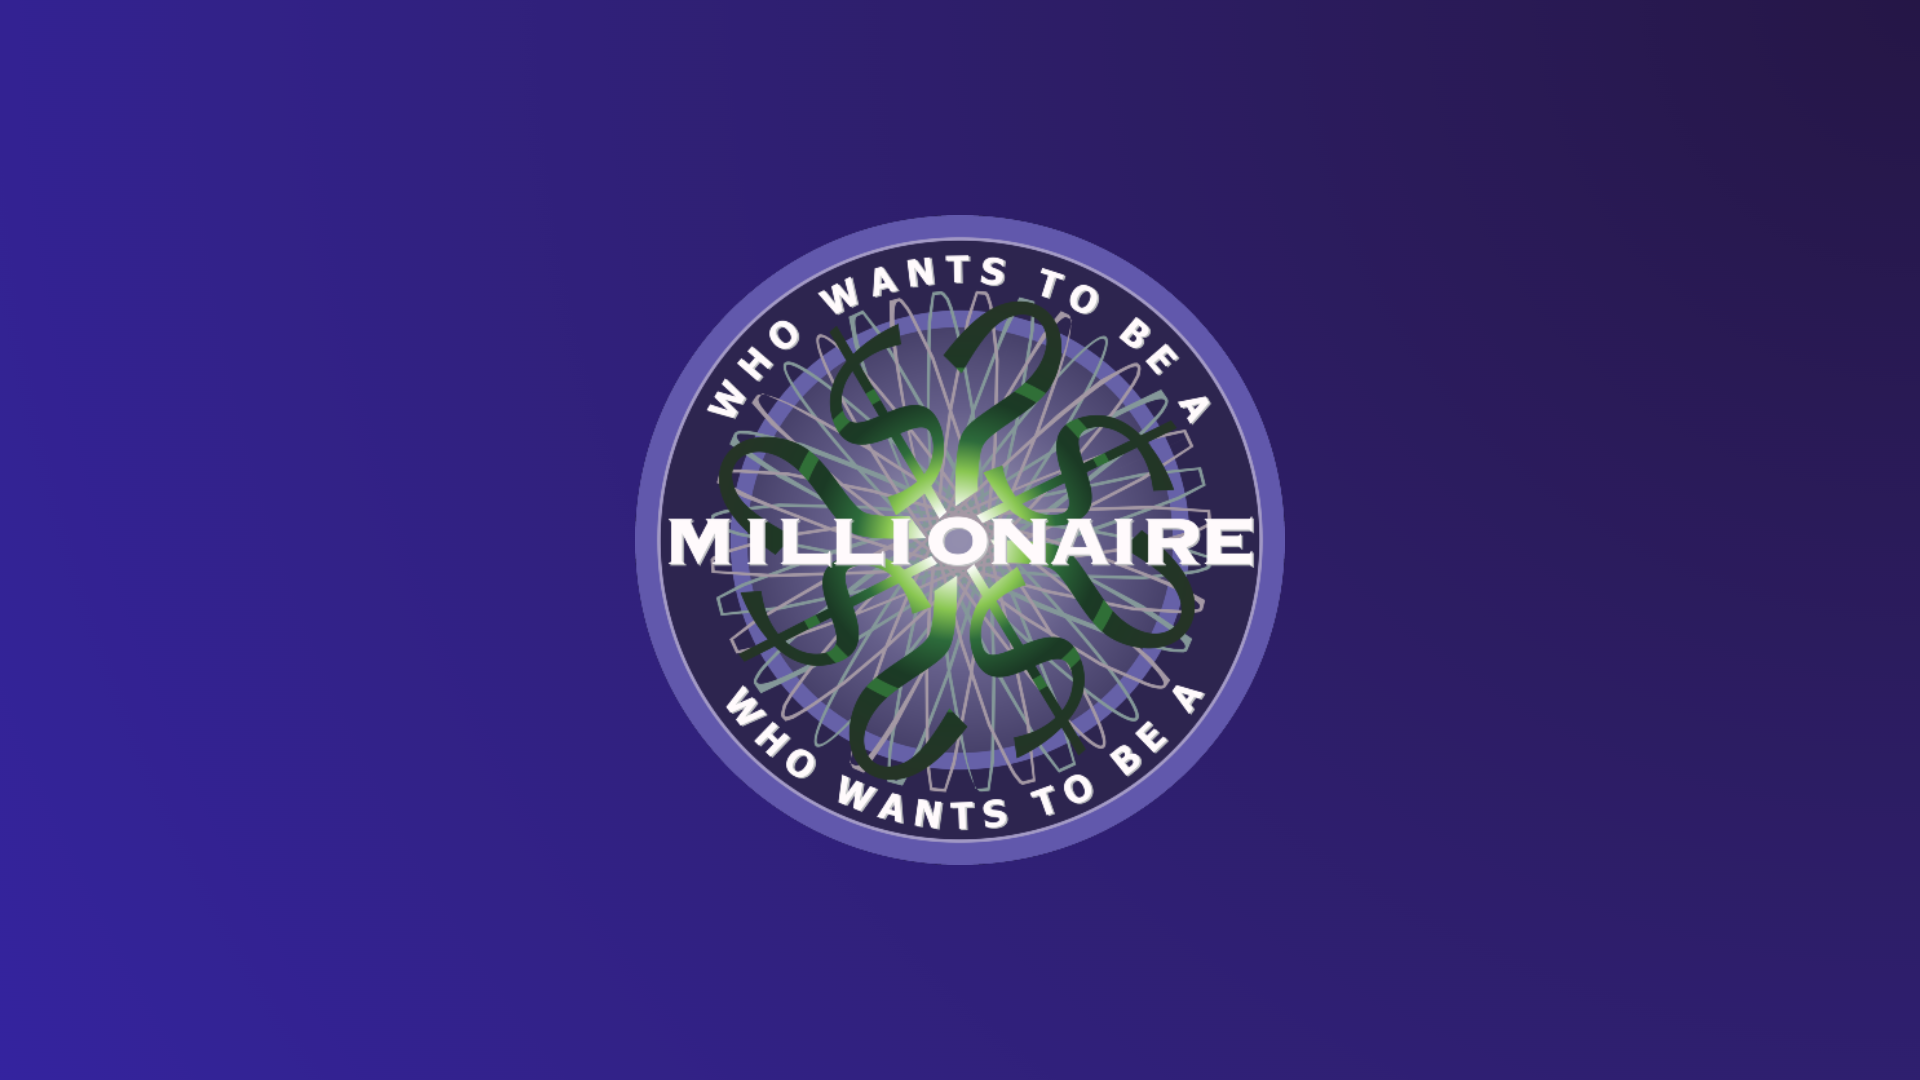 Who Wants To Be A Milionaire